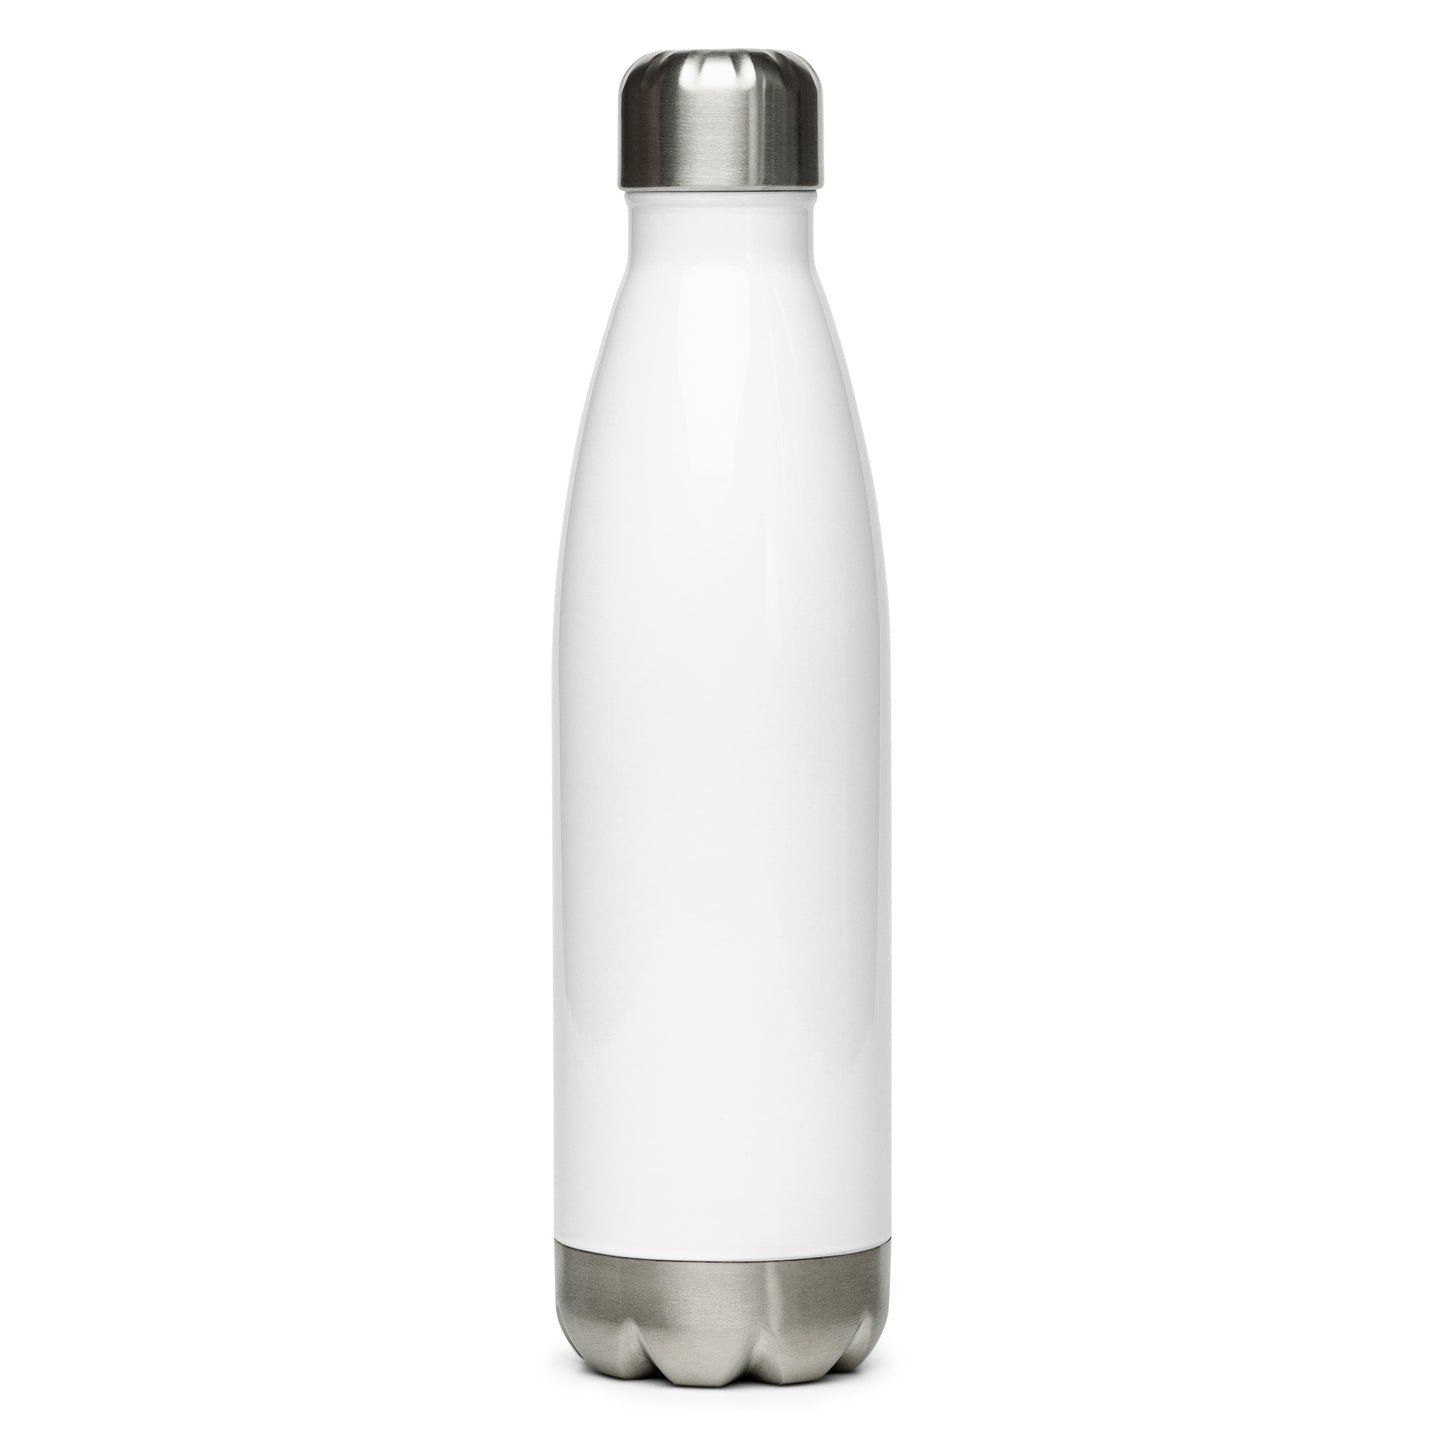 Aviation Gift Water Bottle - Camo Green • EZE Buenos Aires • YHM Designs - Image 09